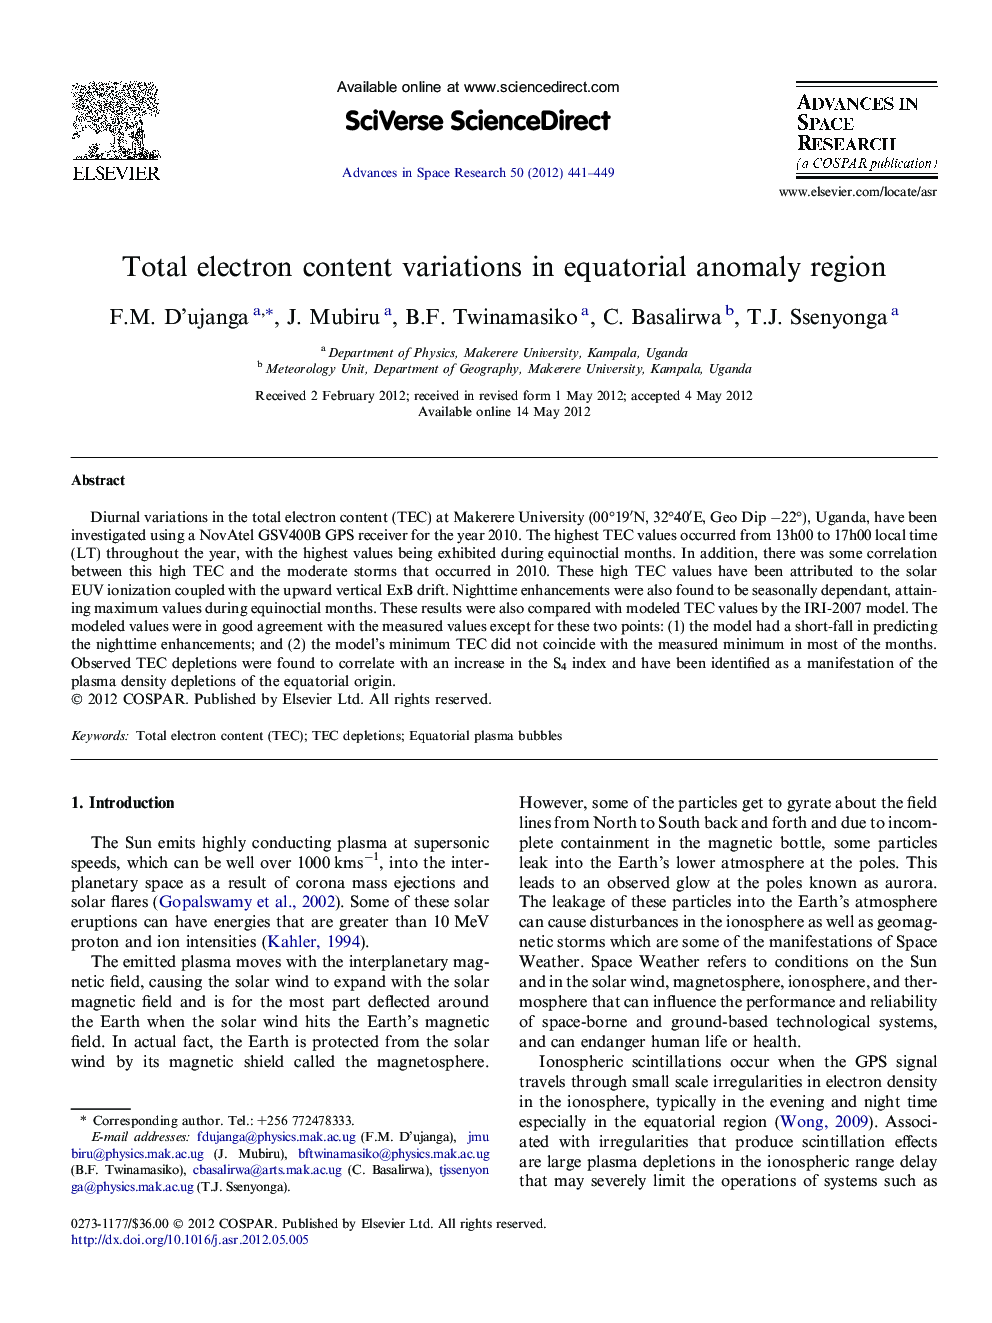 Total electron content variations in equatorial anomaly region